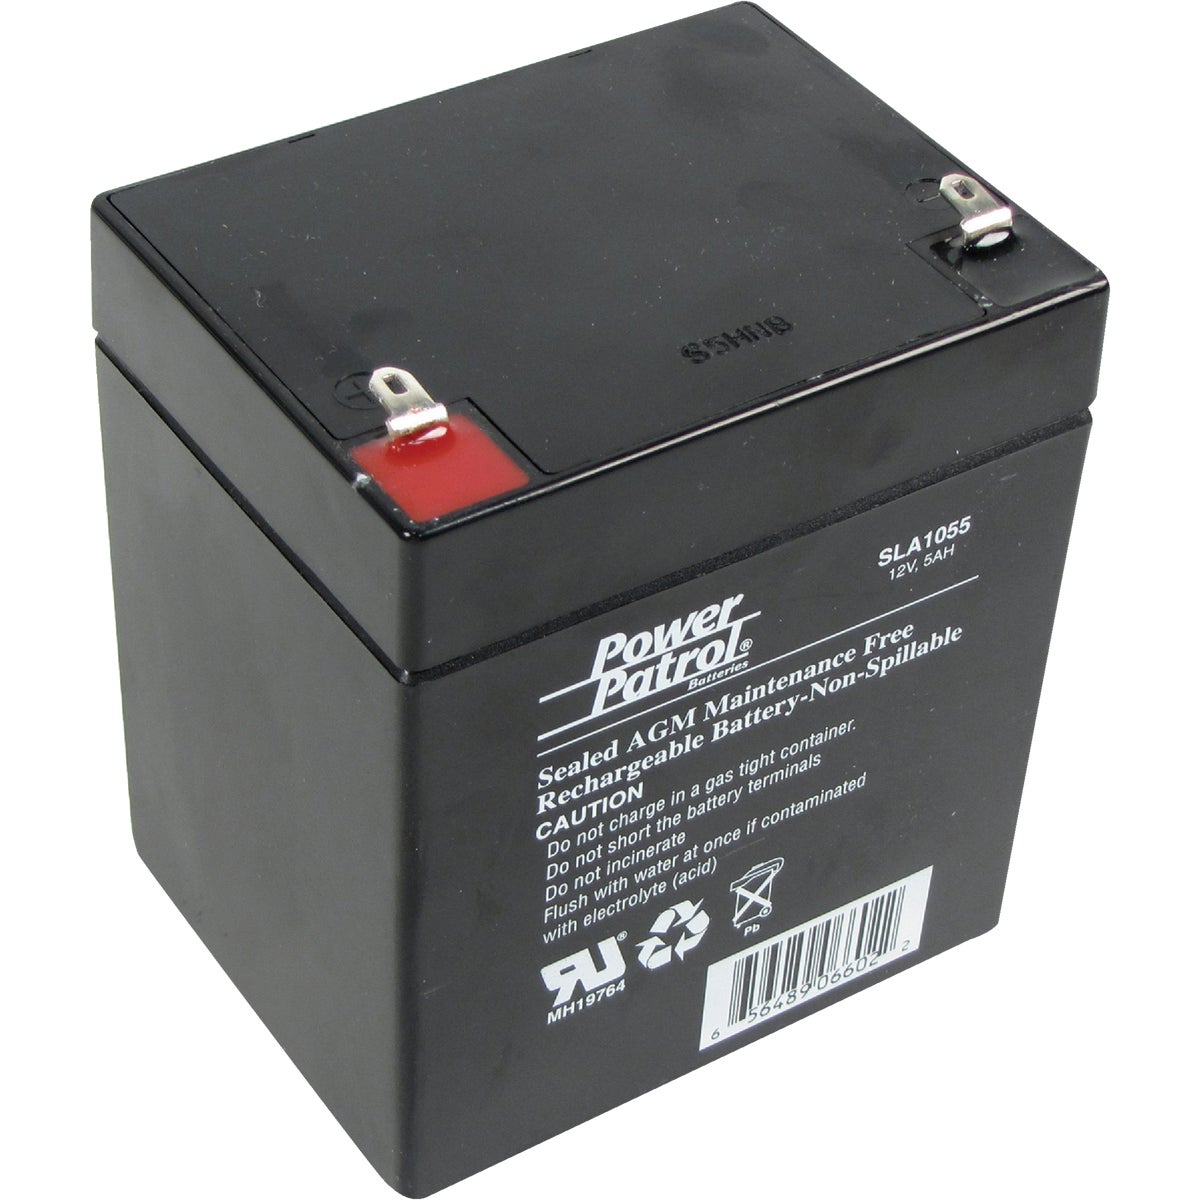 Item 800493, Sealed lead acid battery is lightweight and safe.